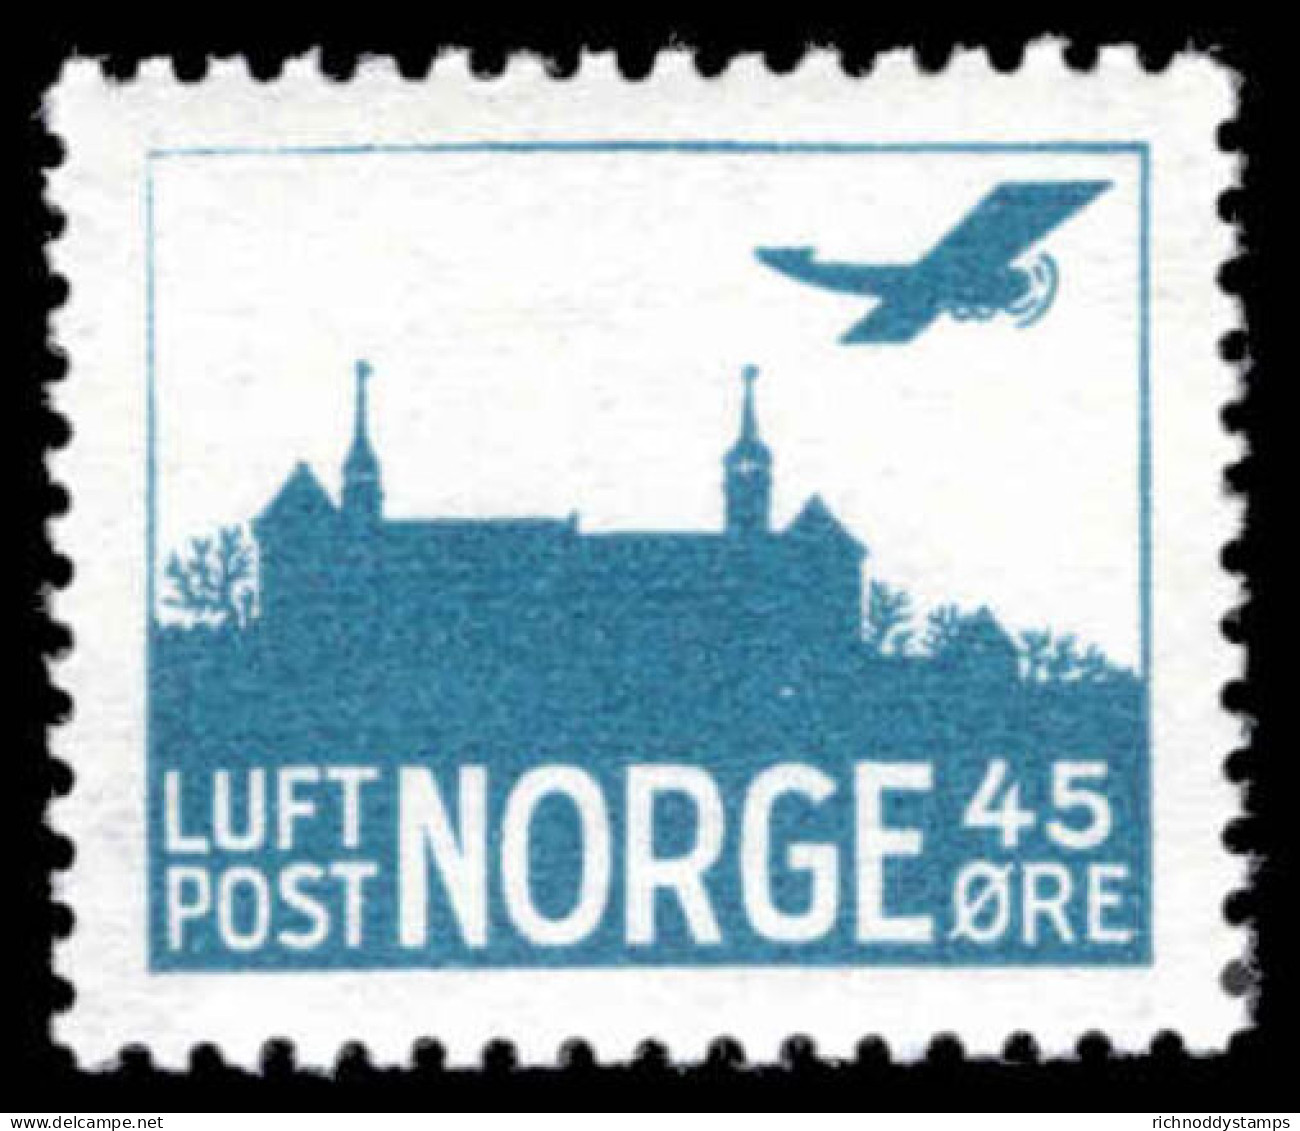 Norway 1927 Air First Printing Unmounted Mint. - Nuovi